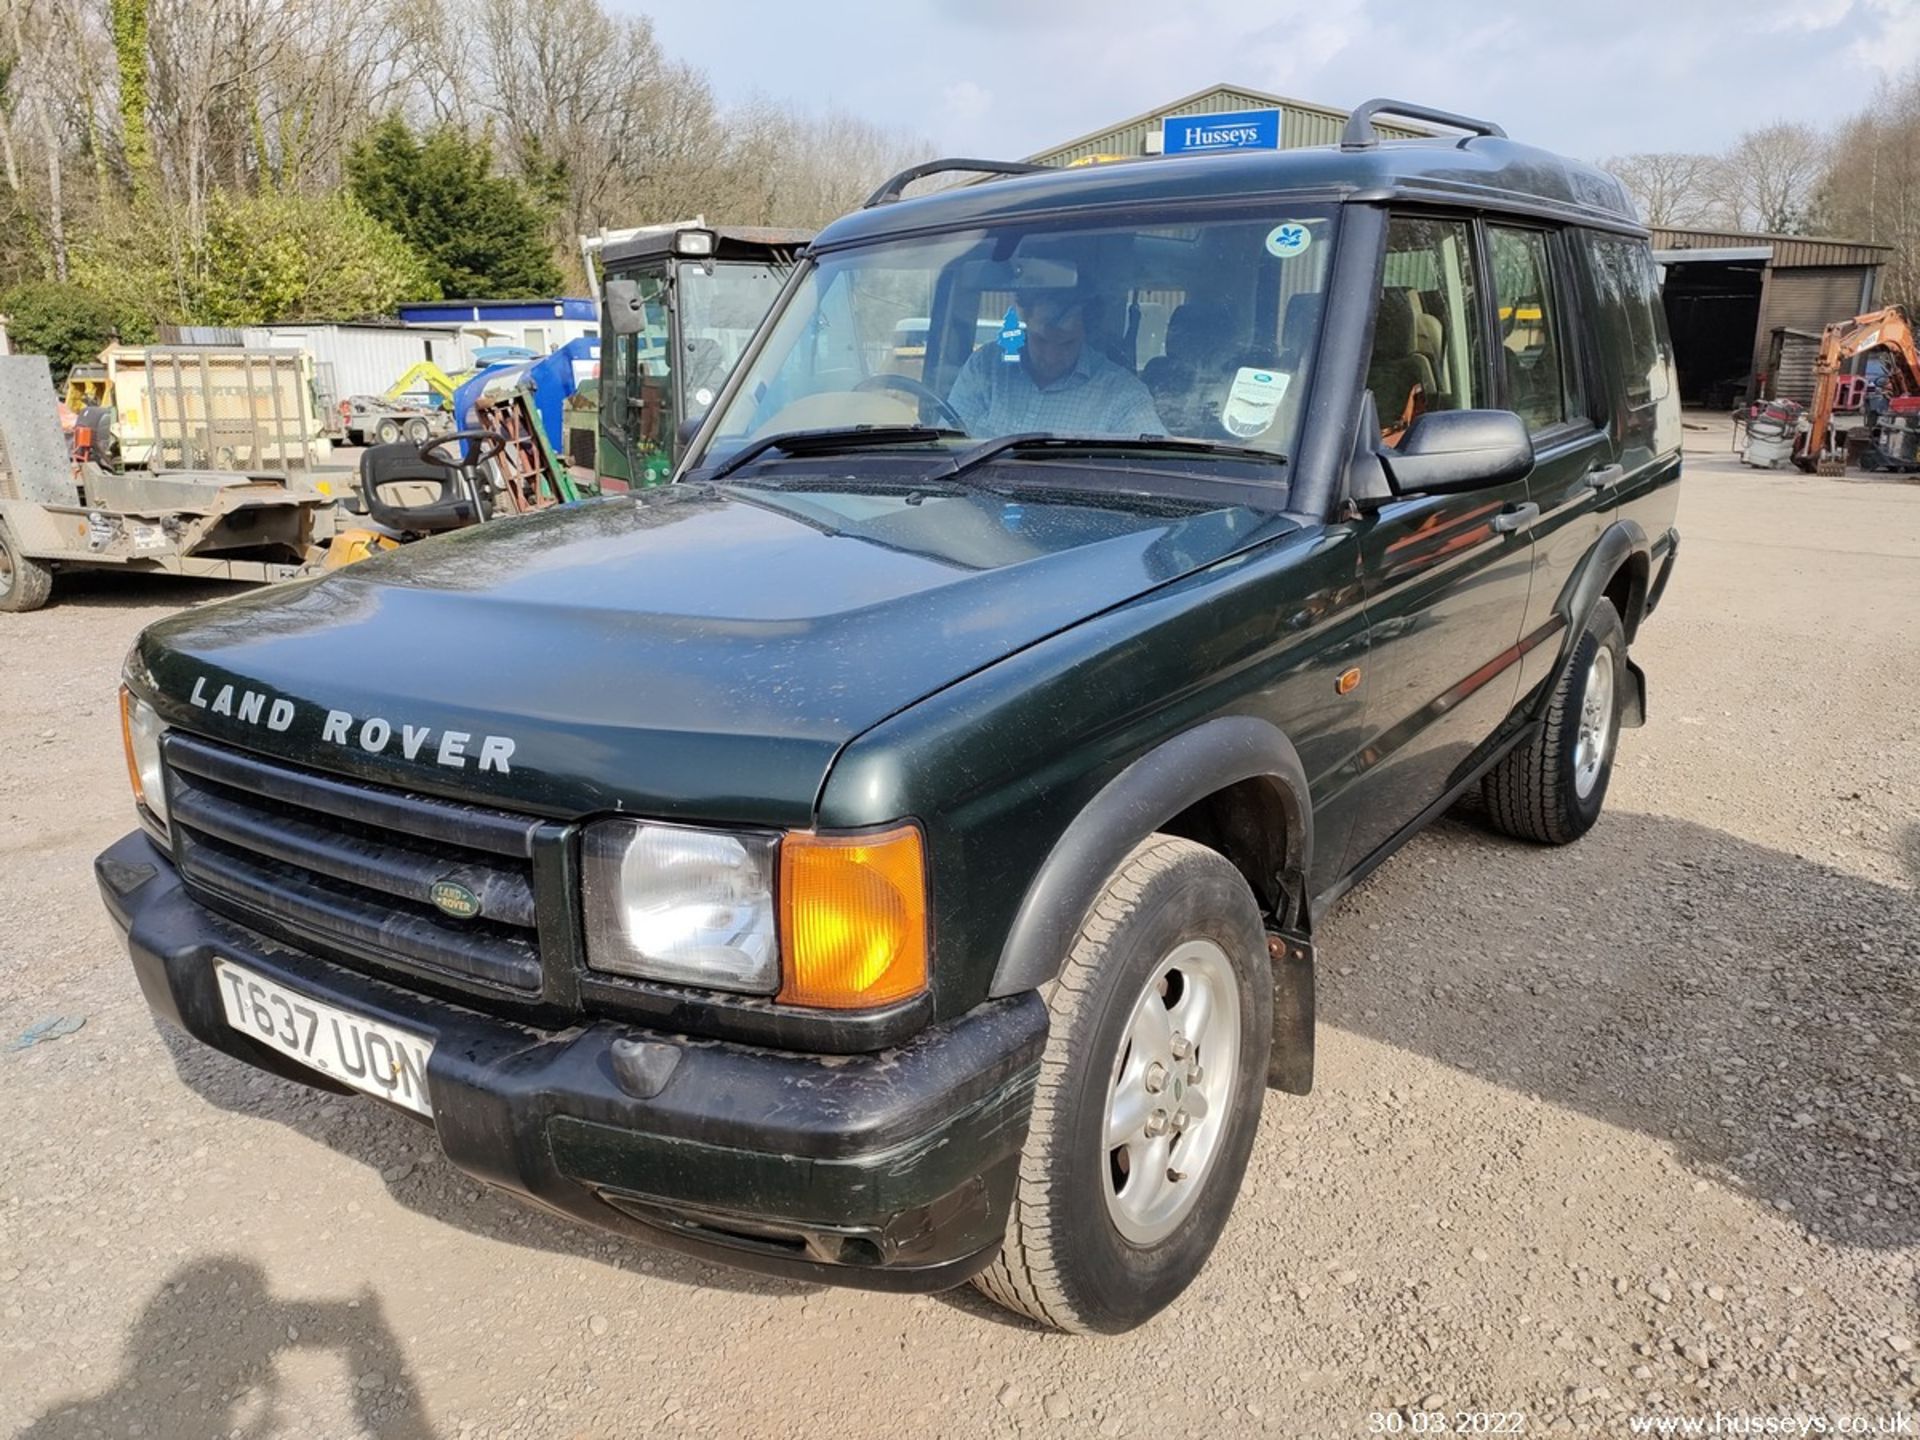 1999 LAND ROVER DISCOVERY TD5 GS - 2495cc 5dr Estate (Green) - Image 4 of 18